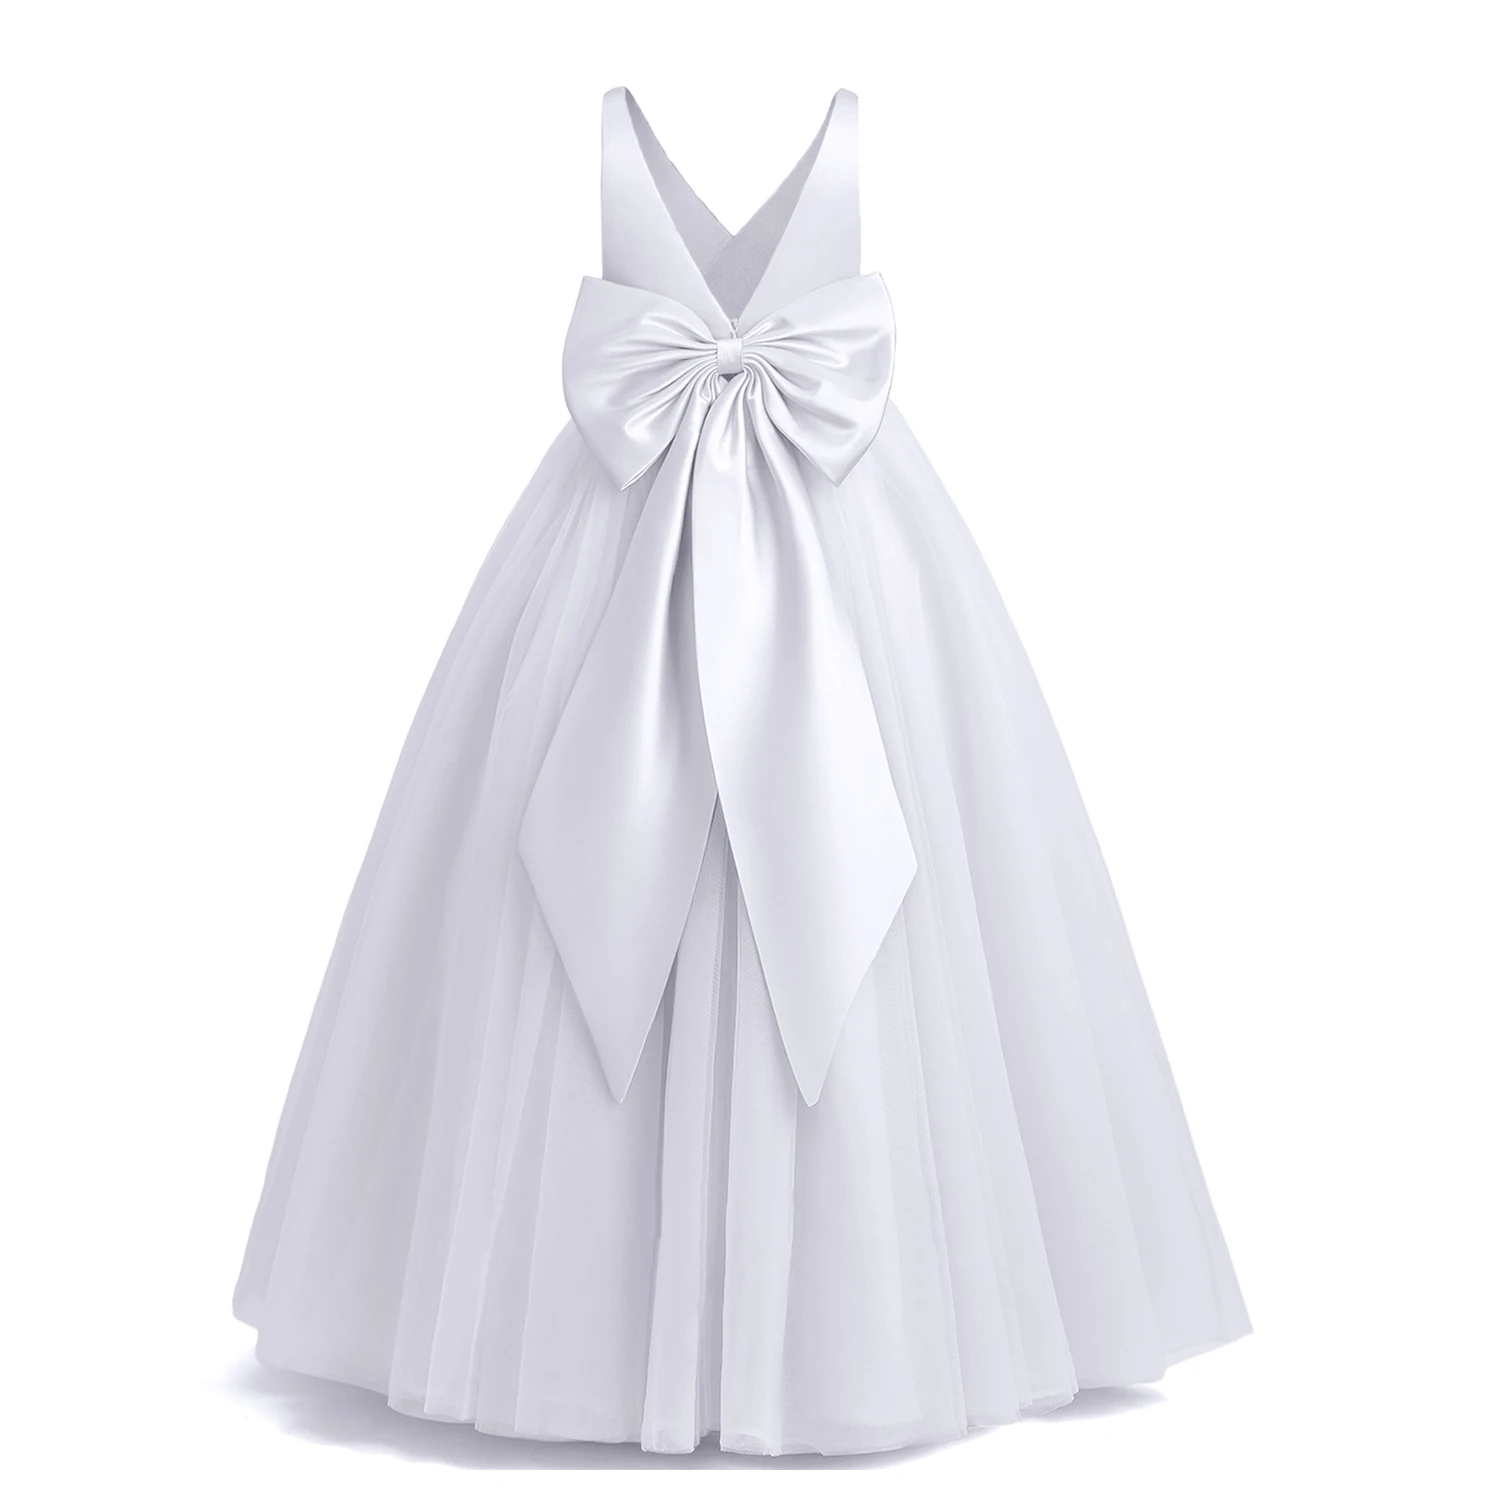 5-14 Year Bridesmaid Girl Lace White Flower Dress For Wedding Ceremony Elegant Junior Young Girls Big Bow Pageant Prom Long Gown